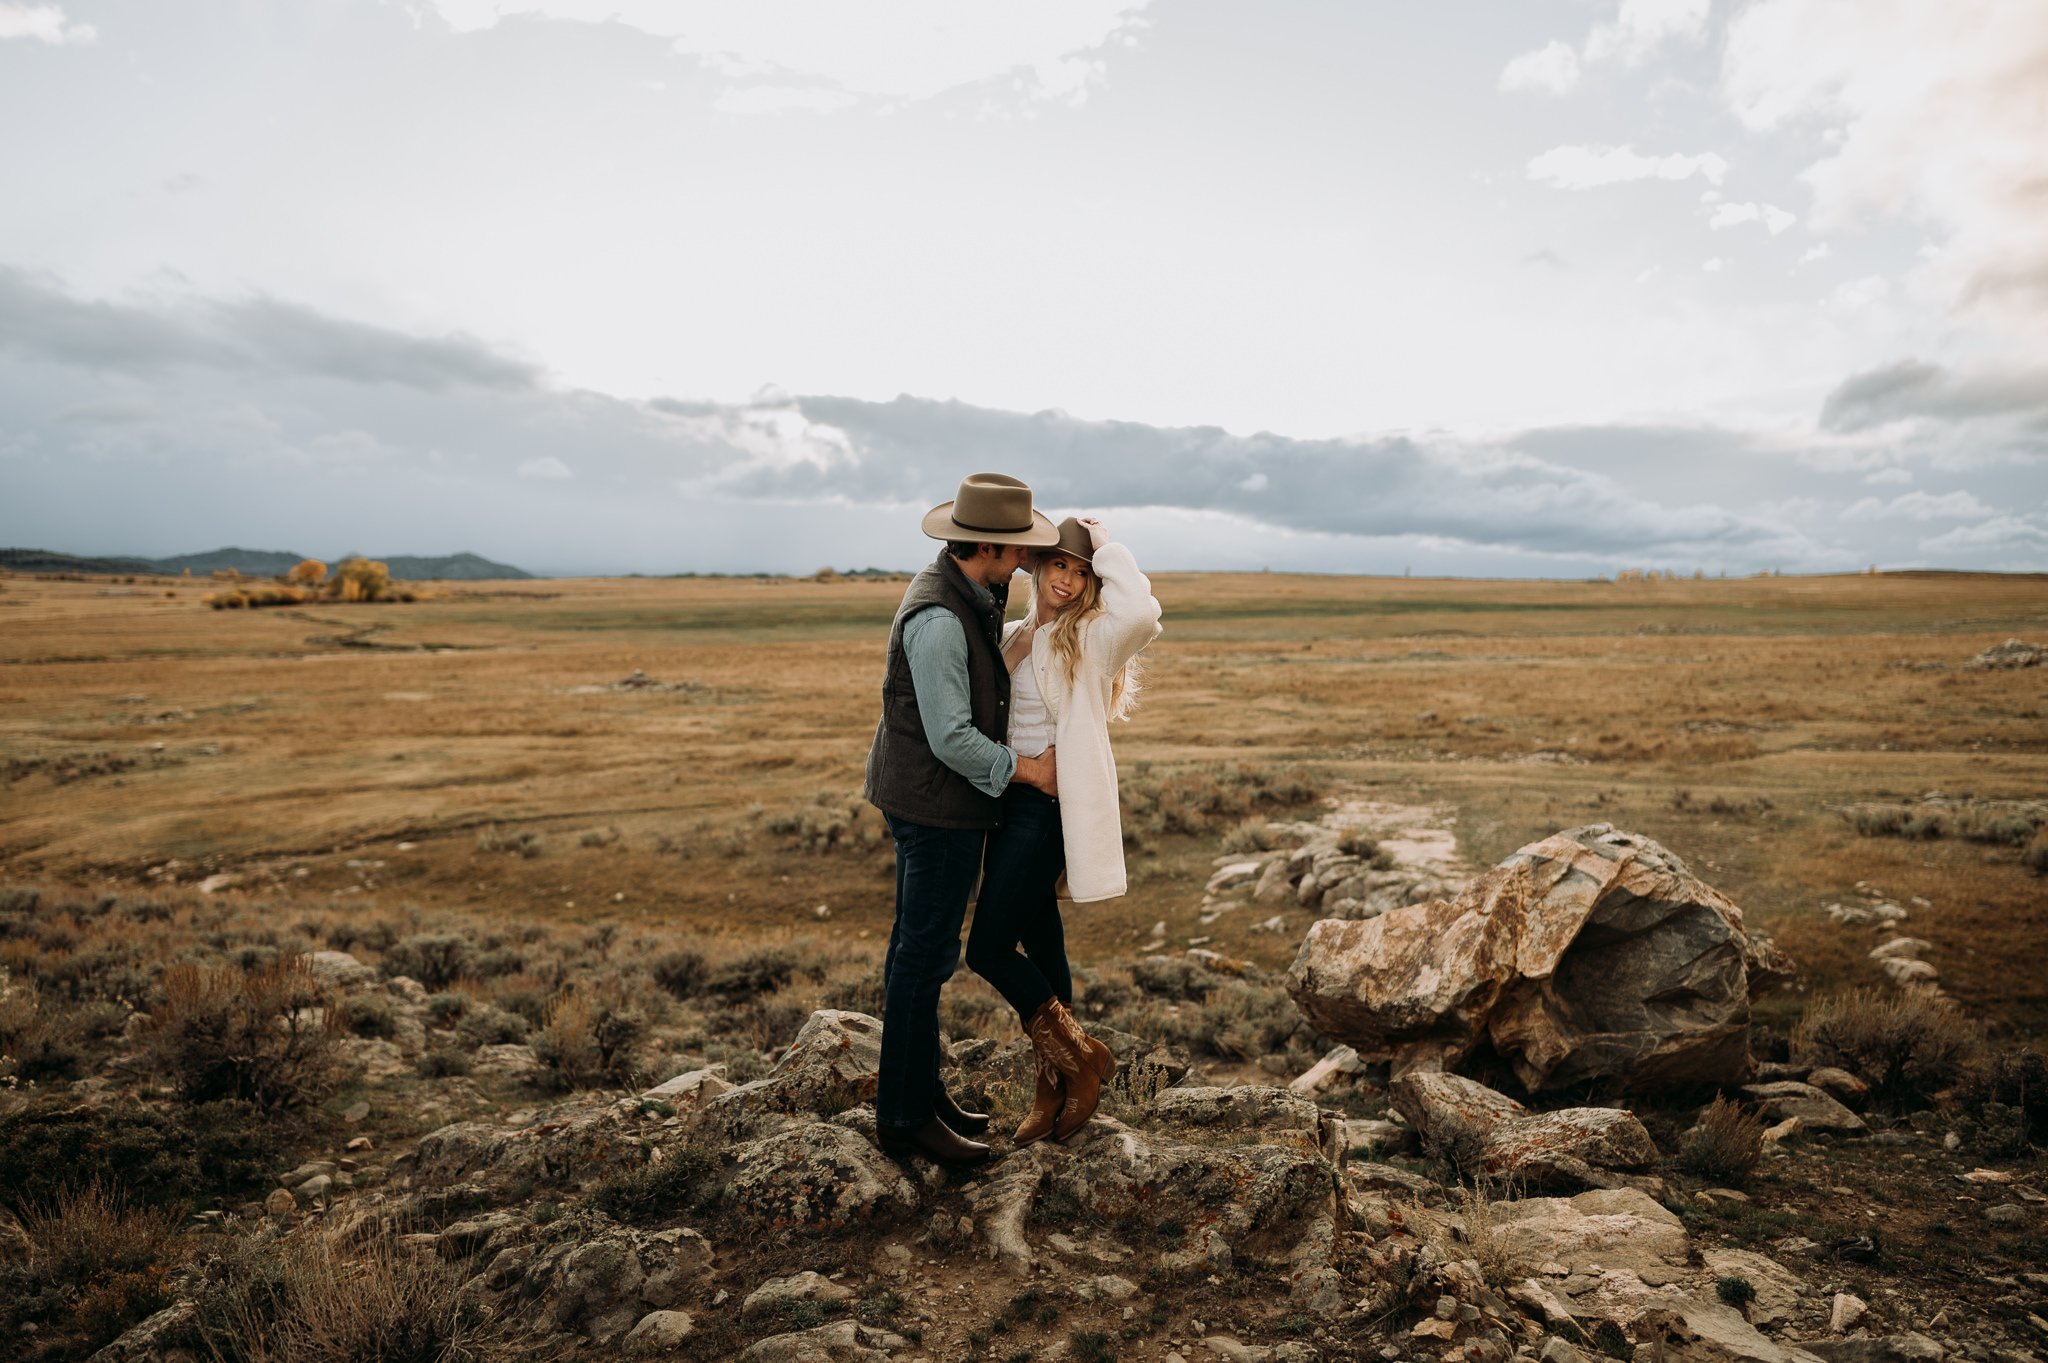 Wedding couple in casual dress in a big open grassy field standing close together bride is hold her cowboy hat at Brush Creek Ranch, Wyoming